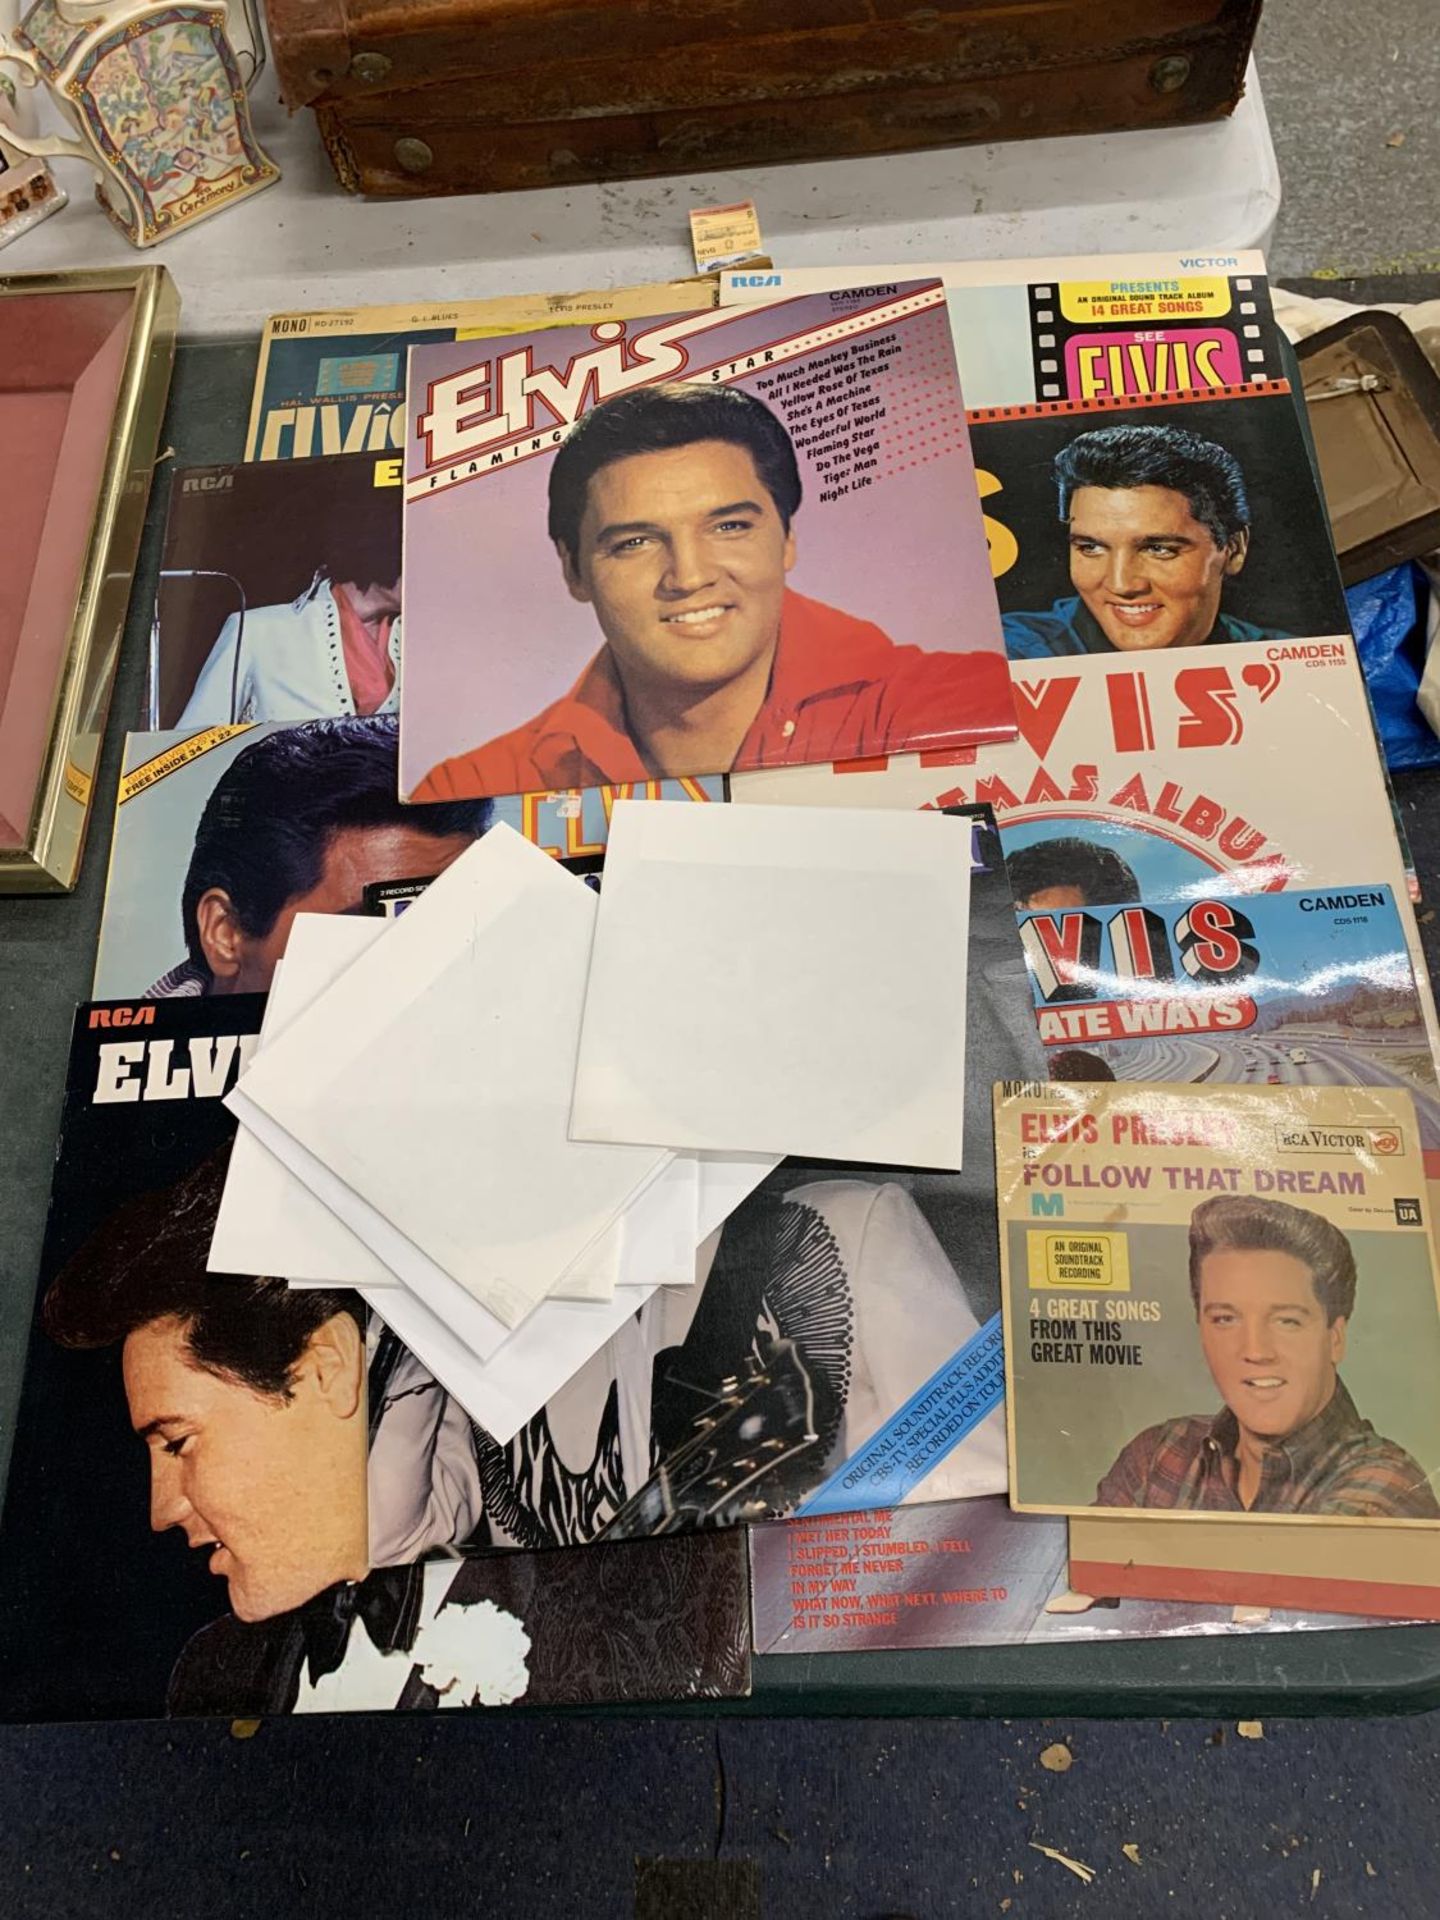 A LARGE COLLECTION OF ELVIS PRESLEY LPS AND SINGLES ON VINYL